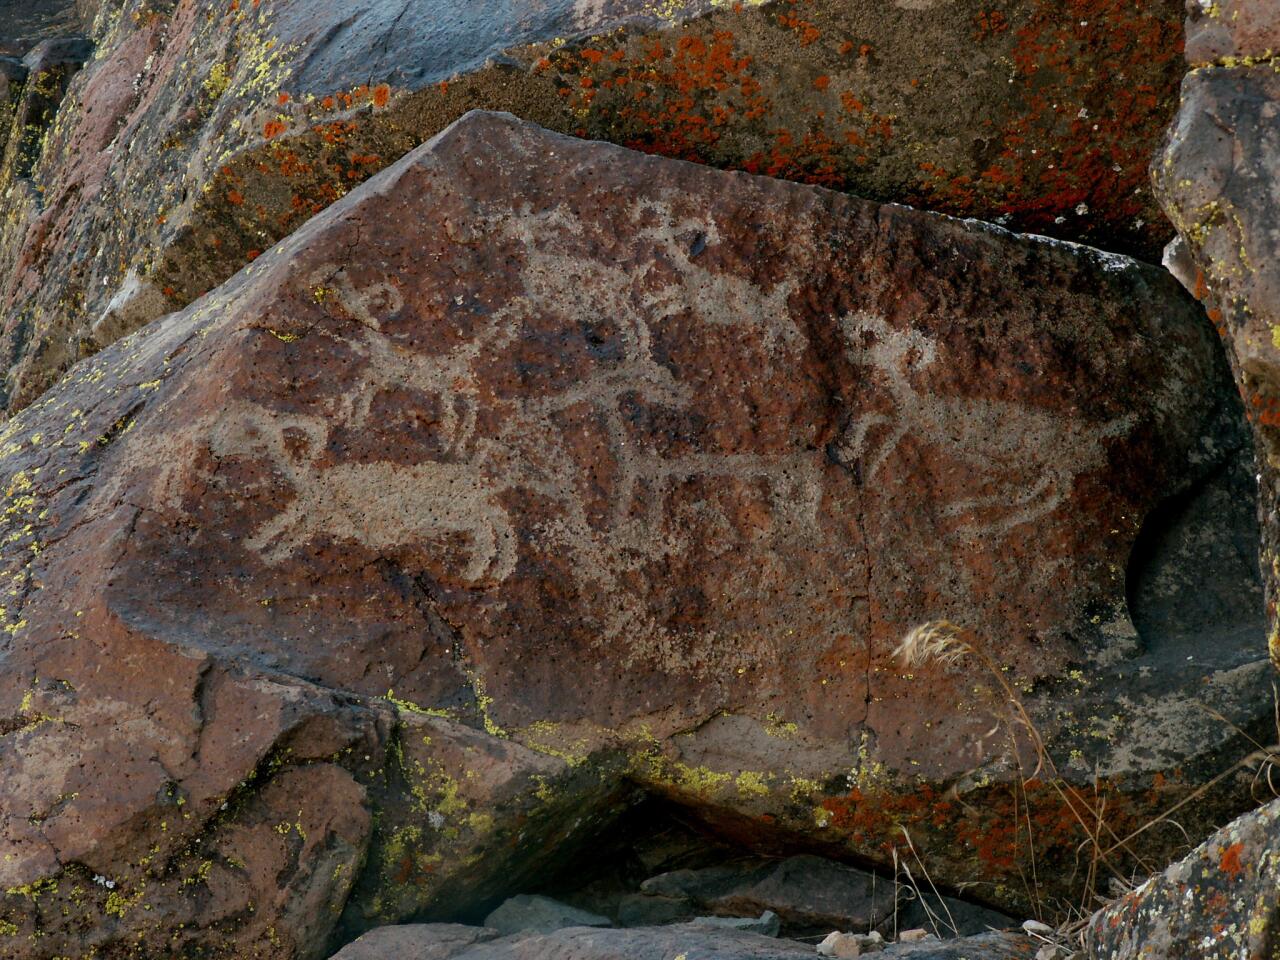 No one knows for sure who decorated Little Petroglyph Canyon with images out of a dreamscape, some thought to be more than 10,000 years old. But the area is probably the richest Amerindian rock-art site in the hemisphere.